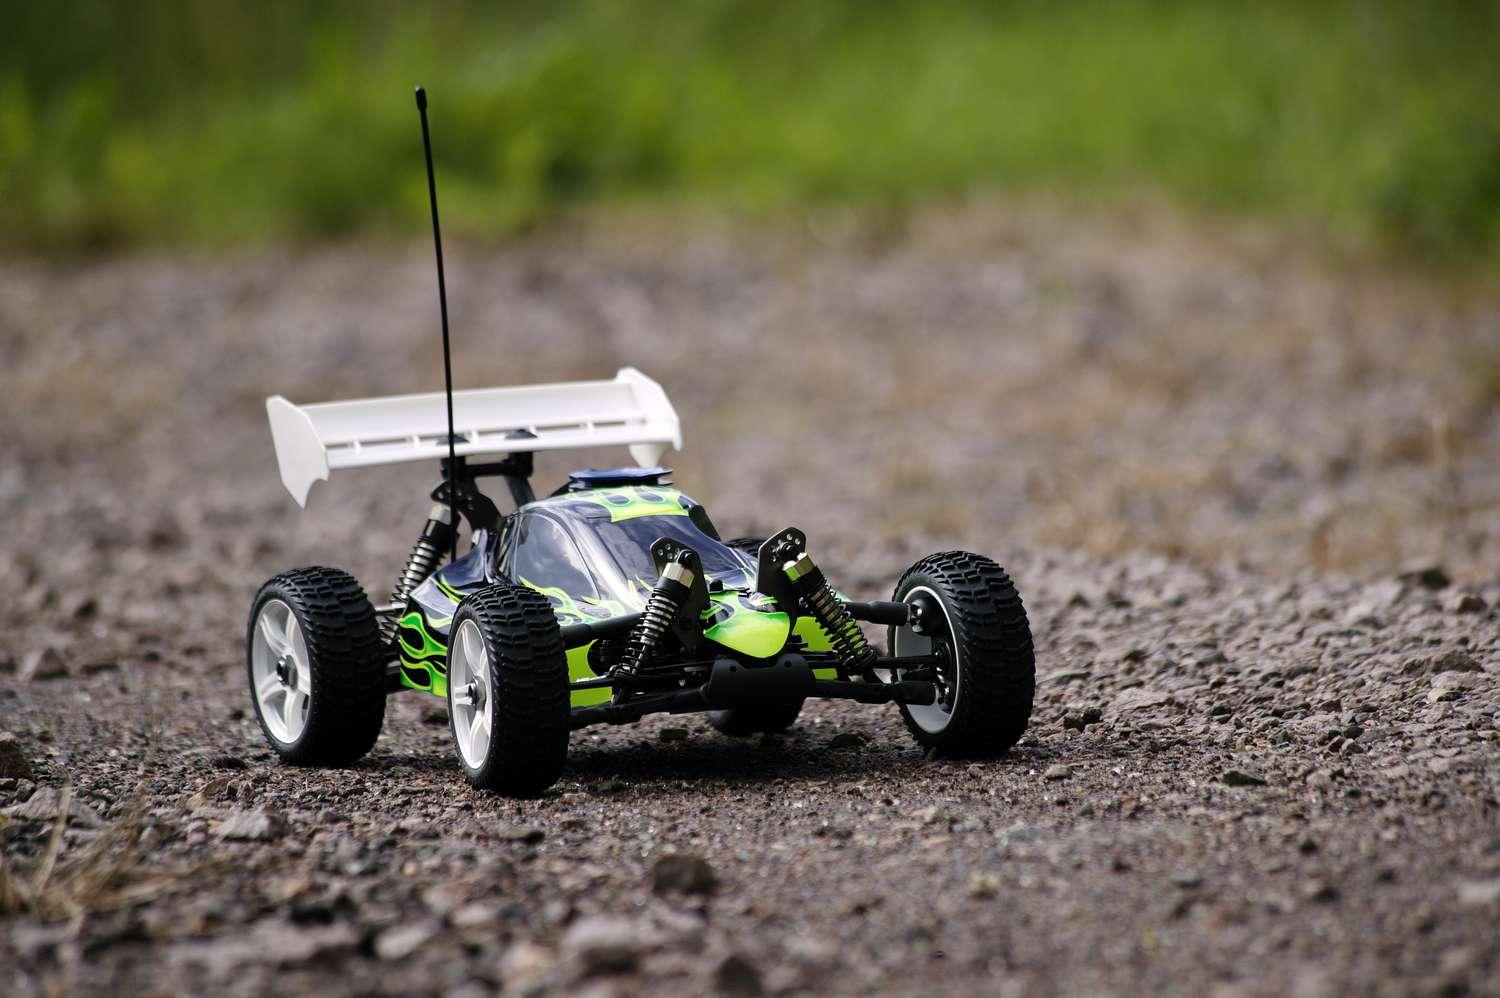 Remote Control Car Under 250: Popular options for remote control cars under 250